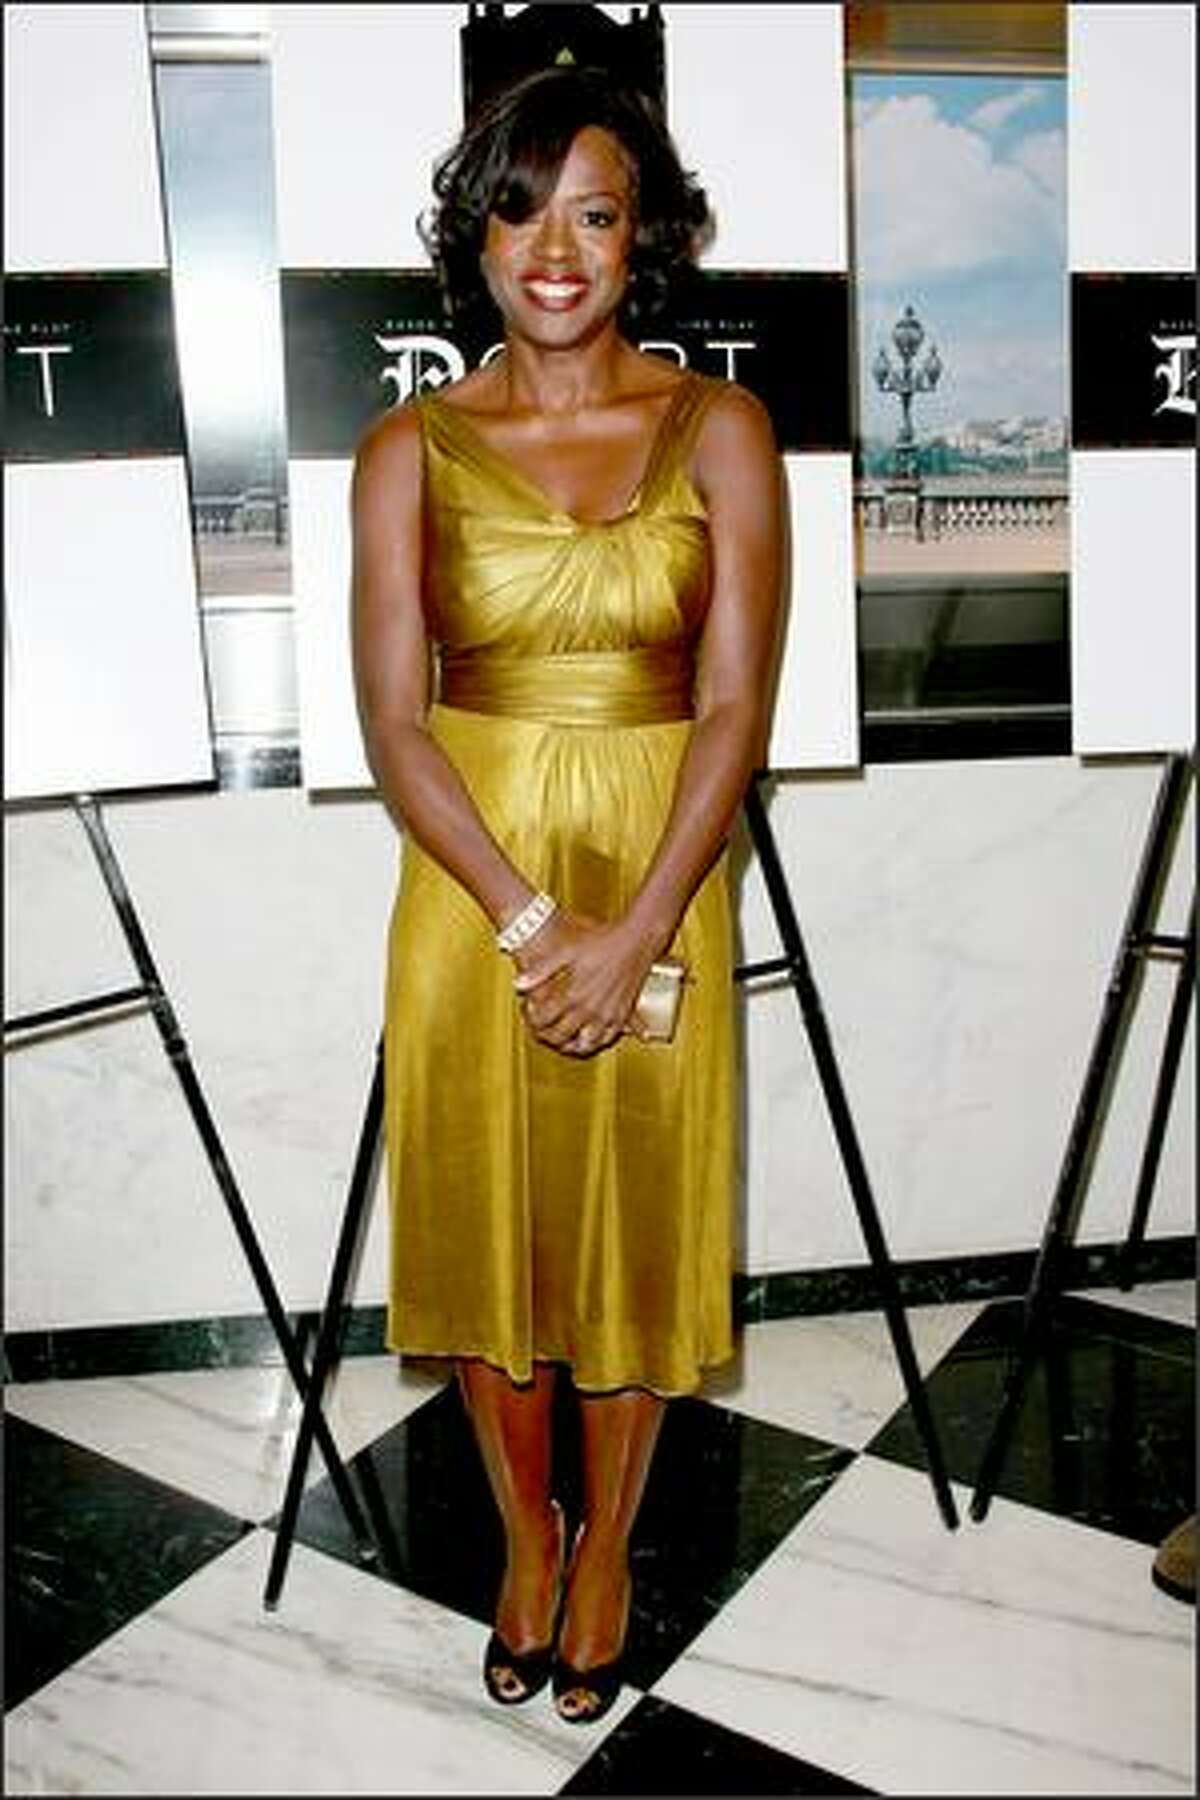 Actress Viola Davis attends the premiere of "Doubt" at the Paris Theater in New York City.